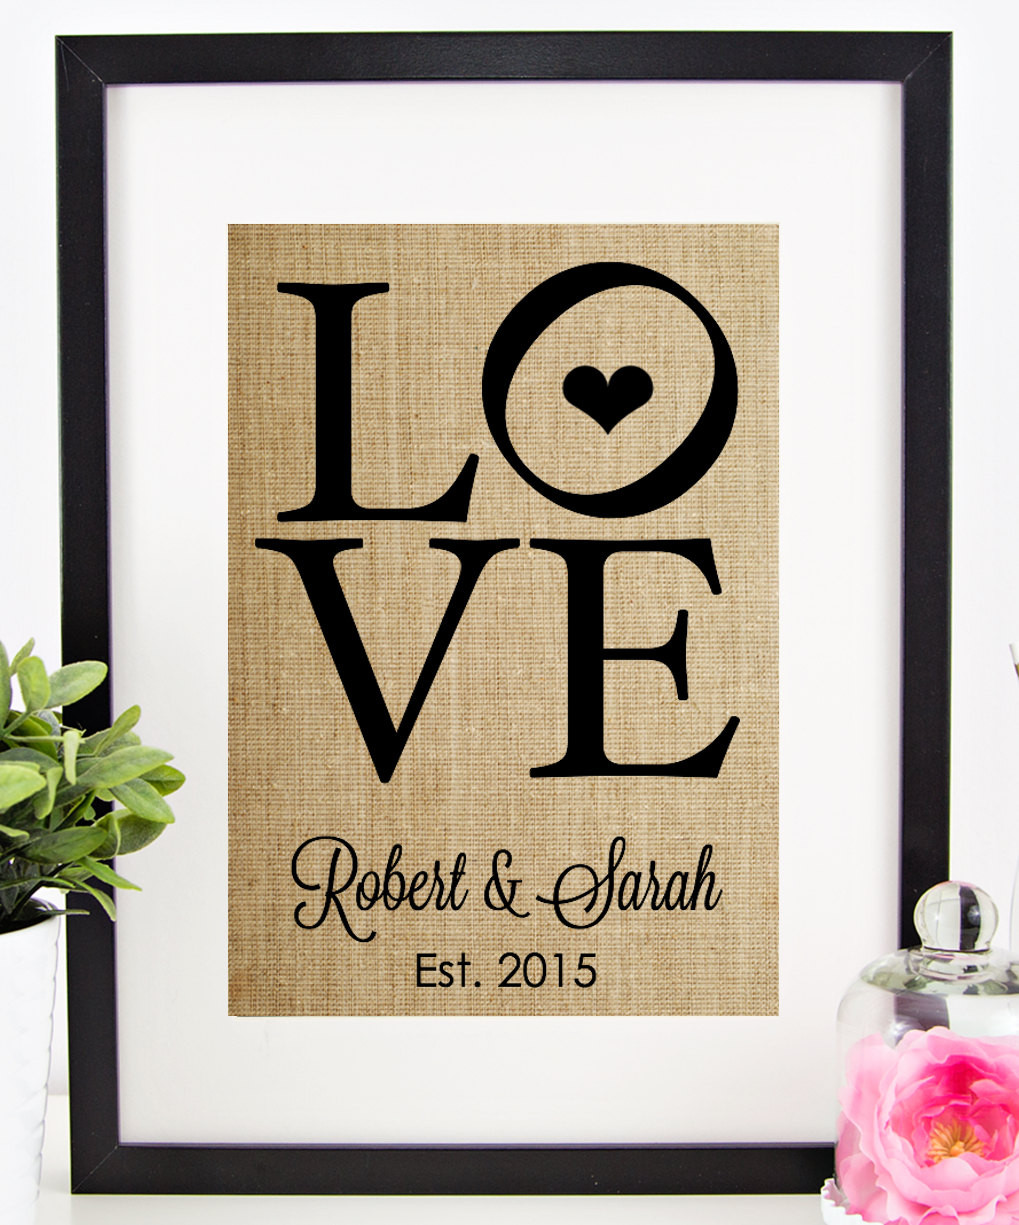 Cool Wedding Gift Ideas For Couples
 Personalized Wedding Gift for Couple Burlap Print LOVE Sign